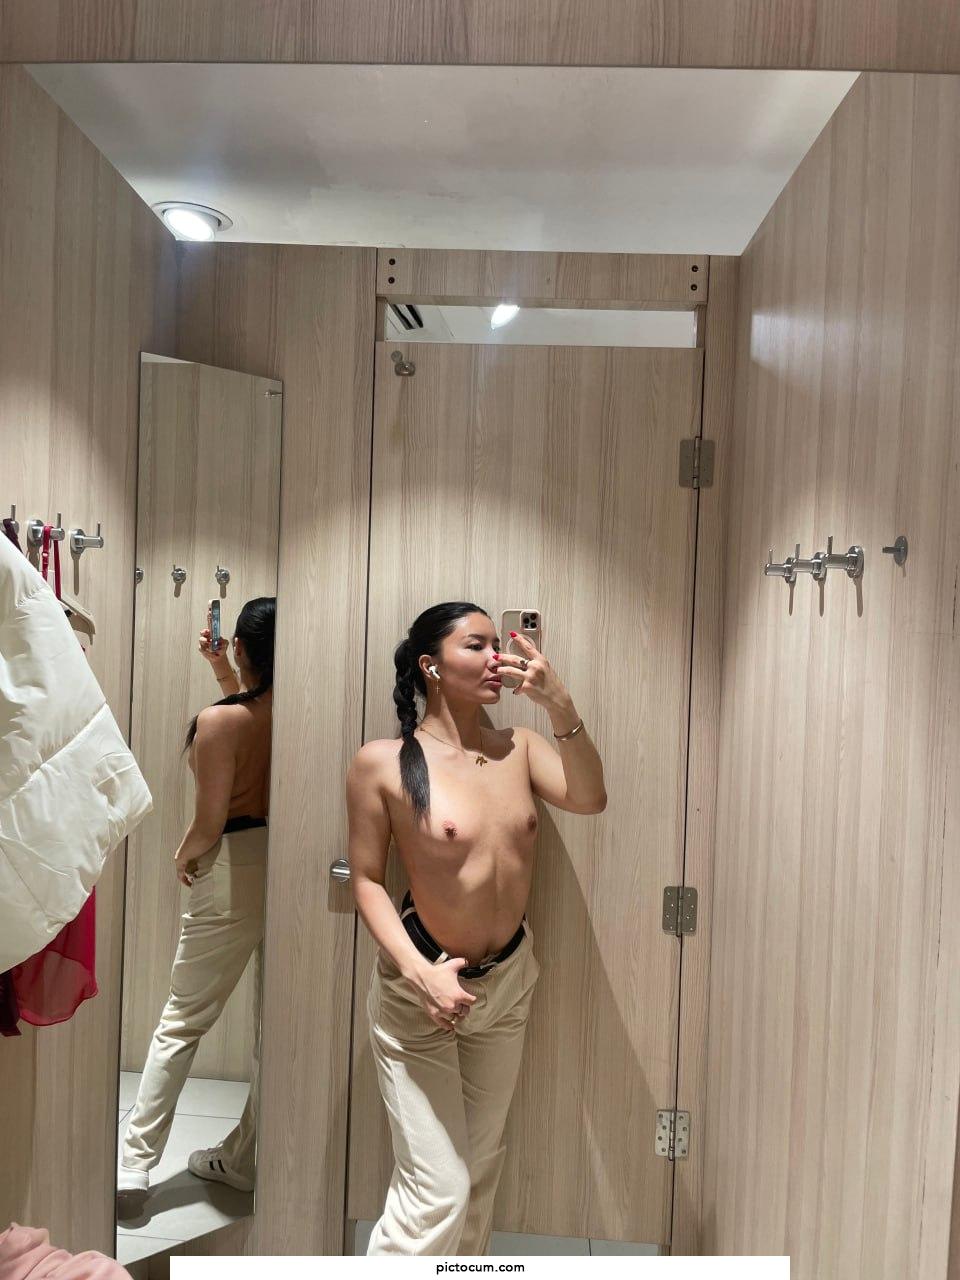 Waiting for you in the fitting room